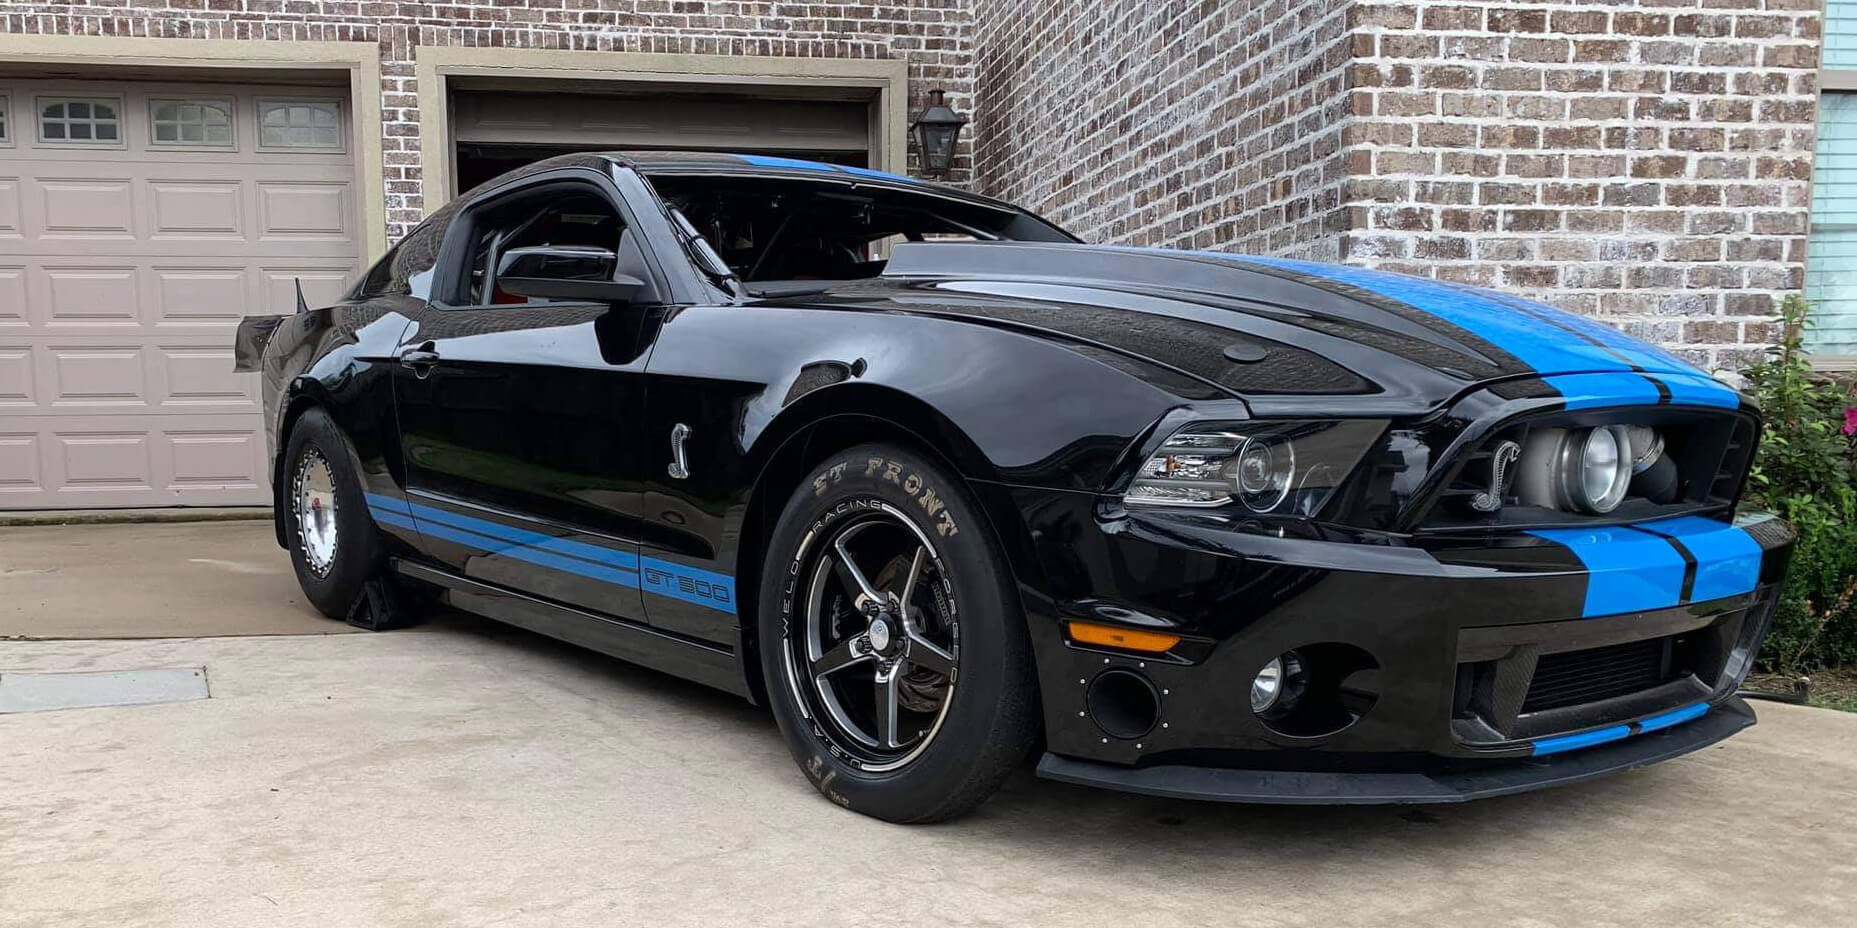 Brian's 2014 Ford Mustang - Holley My Garage